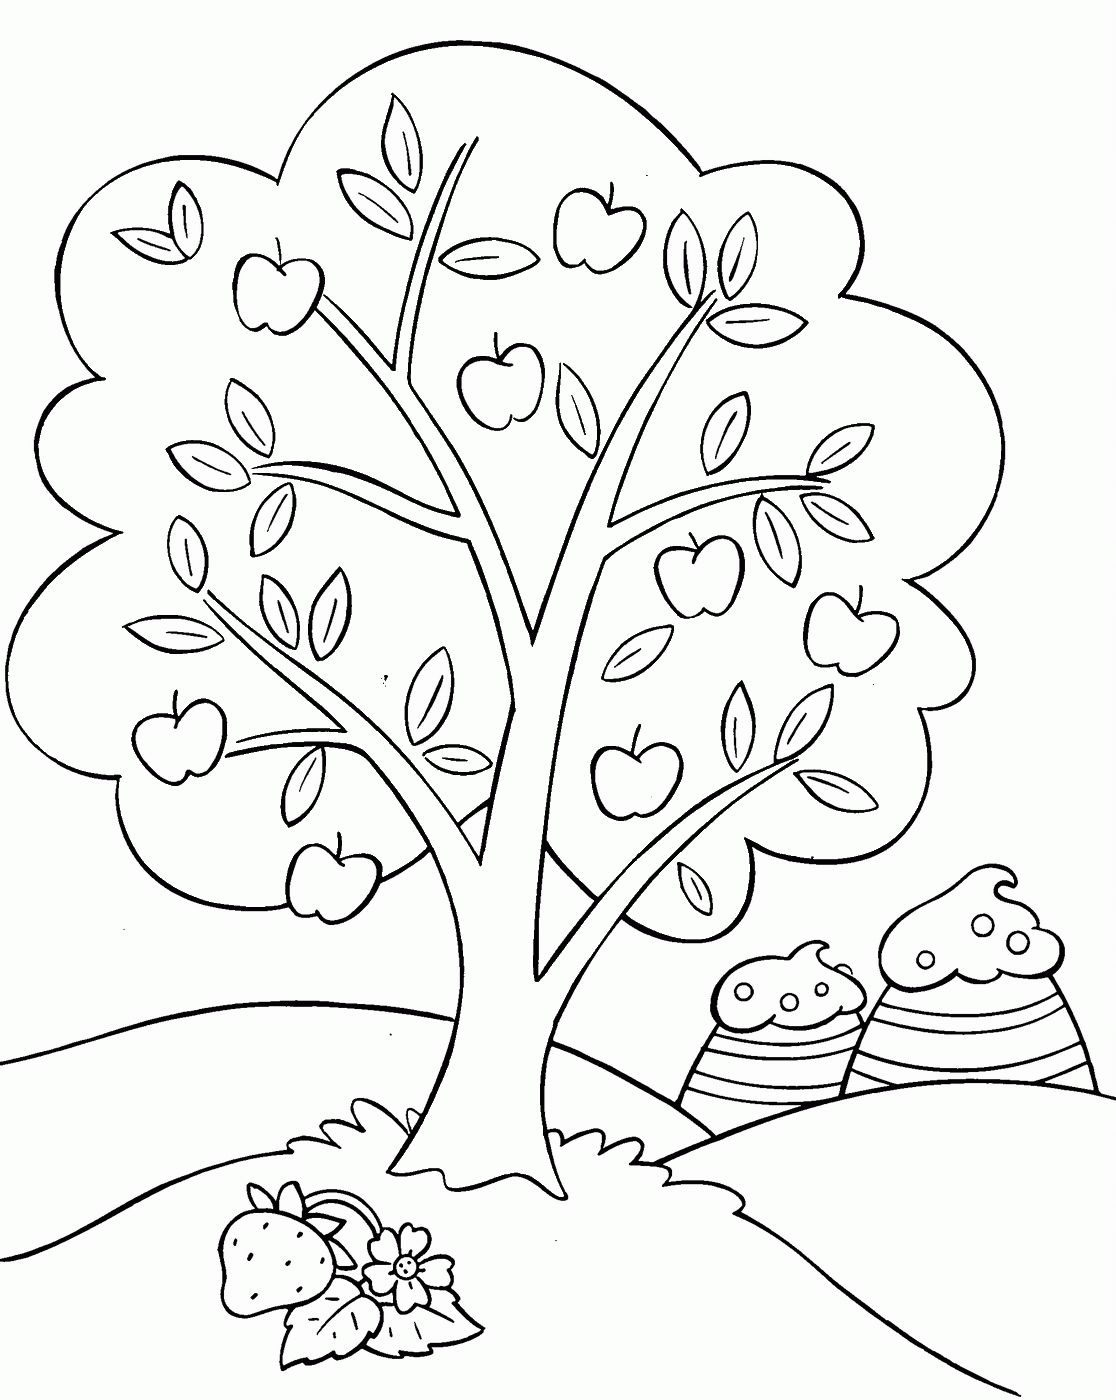 Strawberry Shortcake Coloring Pages TV Film Printable 2020 08113 Coloring4free